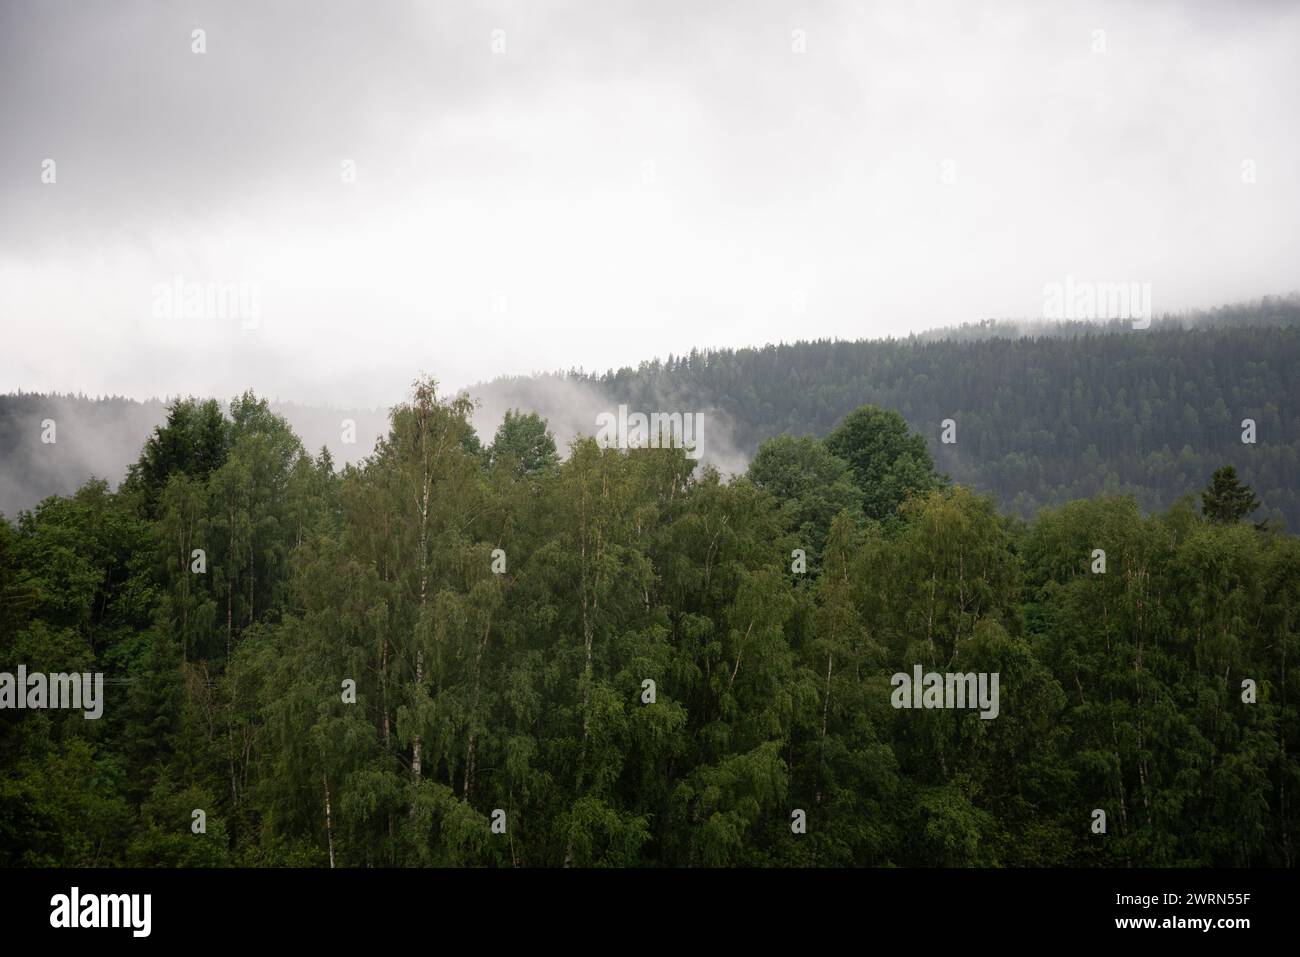 Green trees with Norwegian mountain fjords in the background covered in white mist on a wet autumn day. Stock Photo